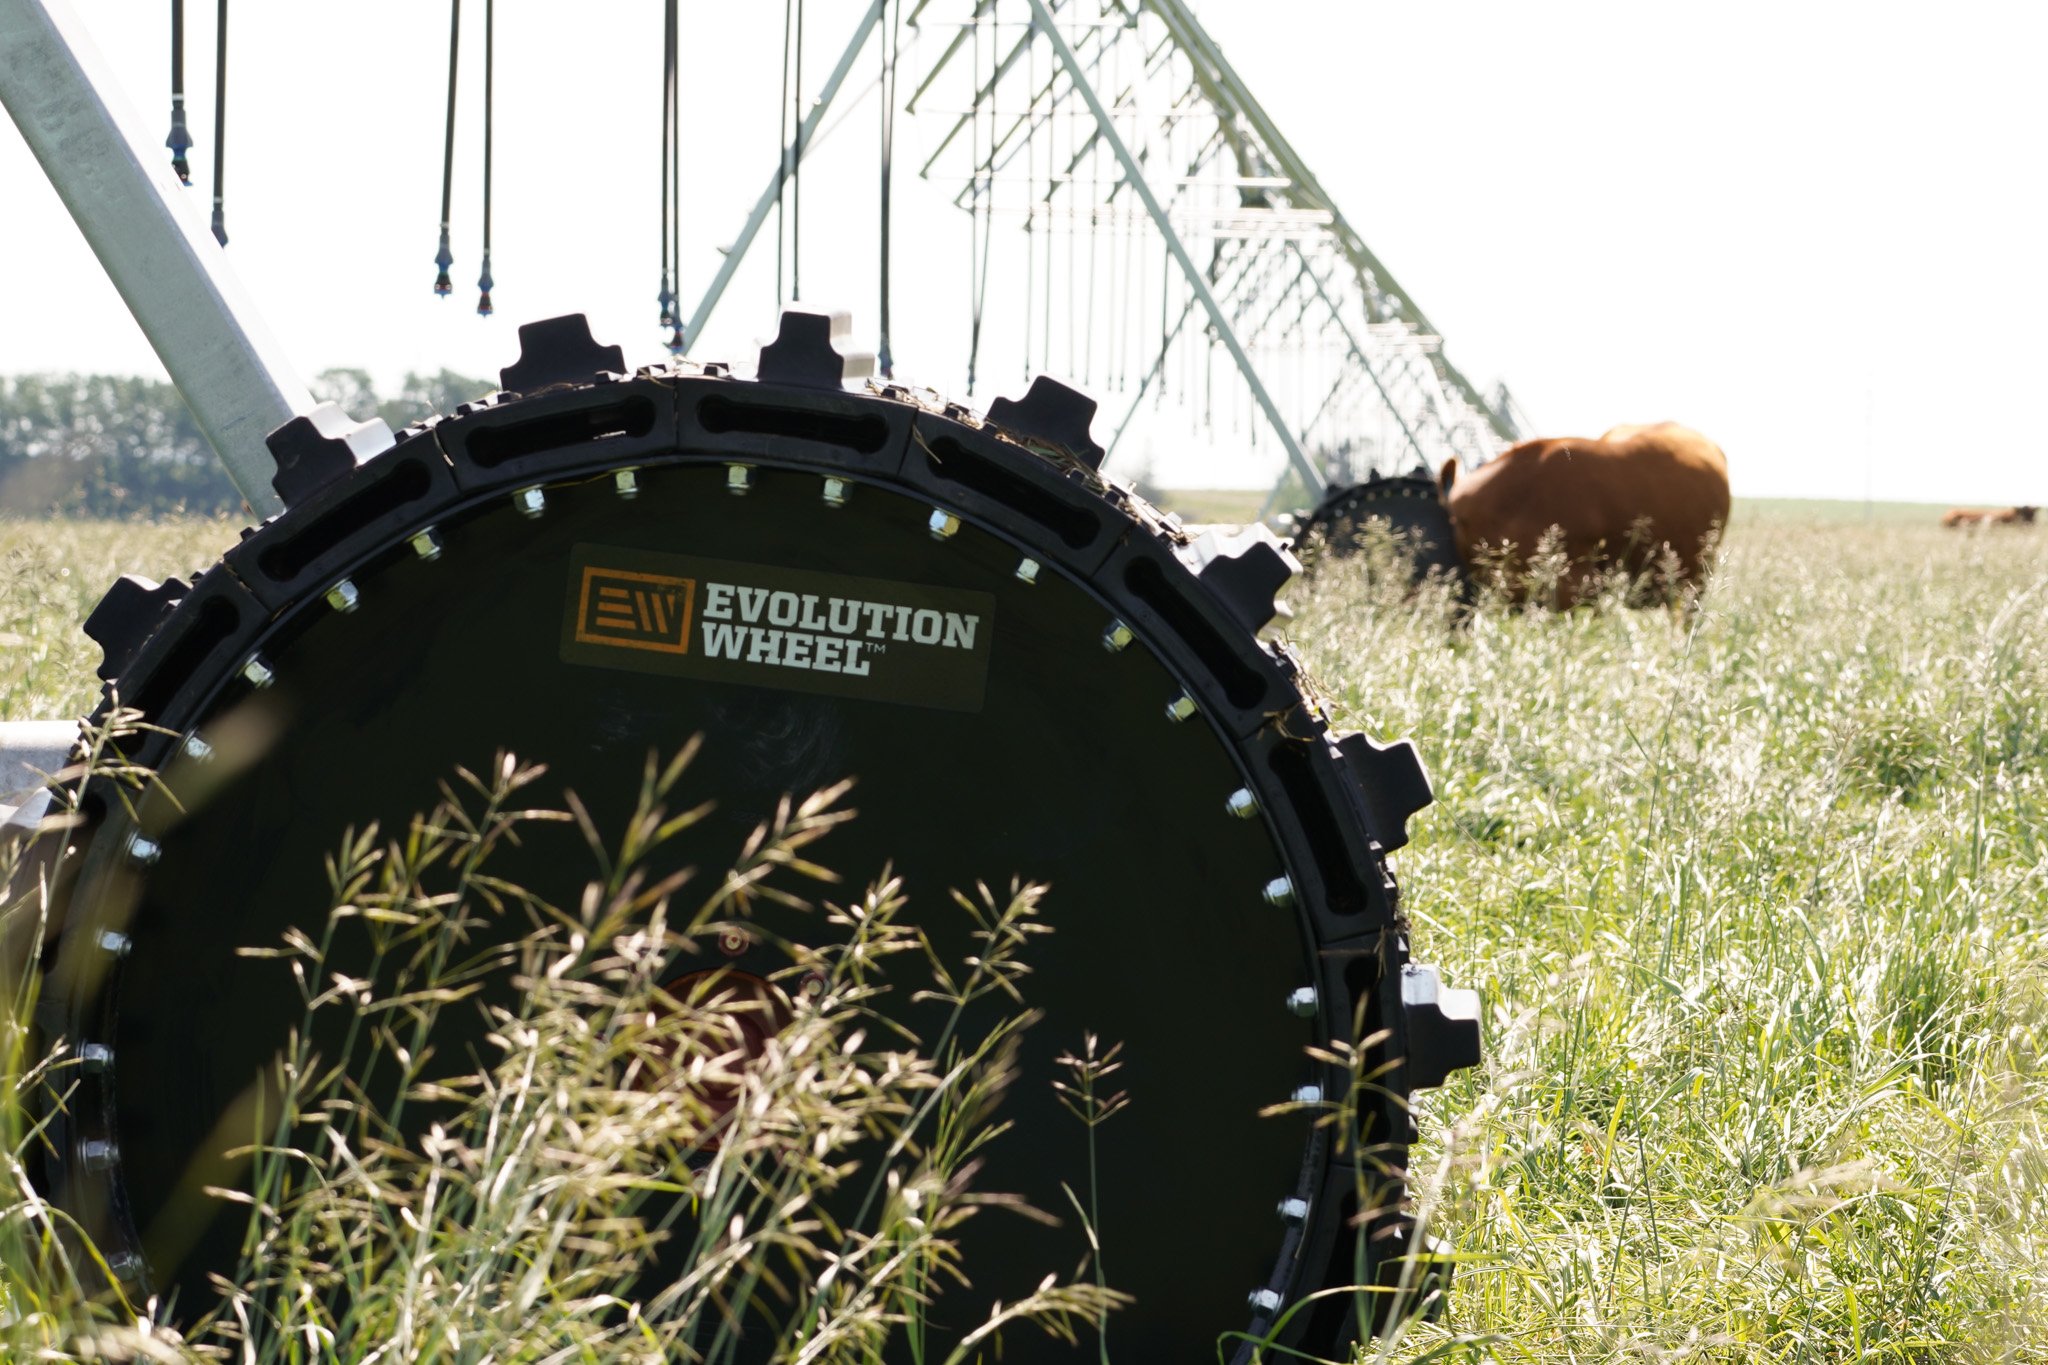 This image shows our EWRS-PIVOT tires on a Reinke irrigation system, in a field with cows. 